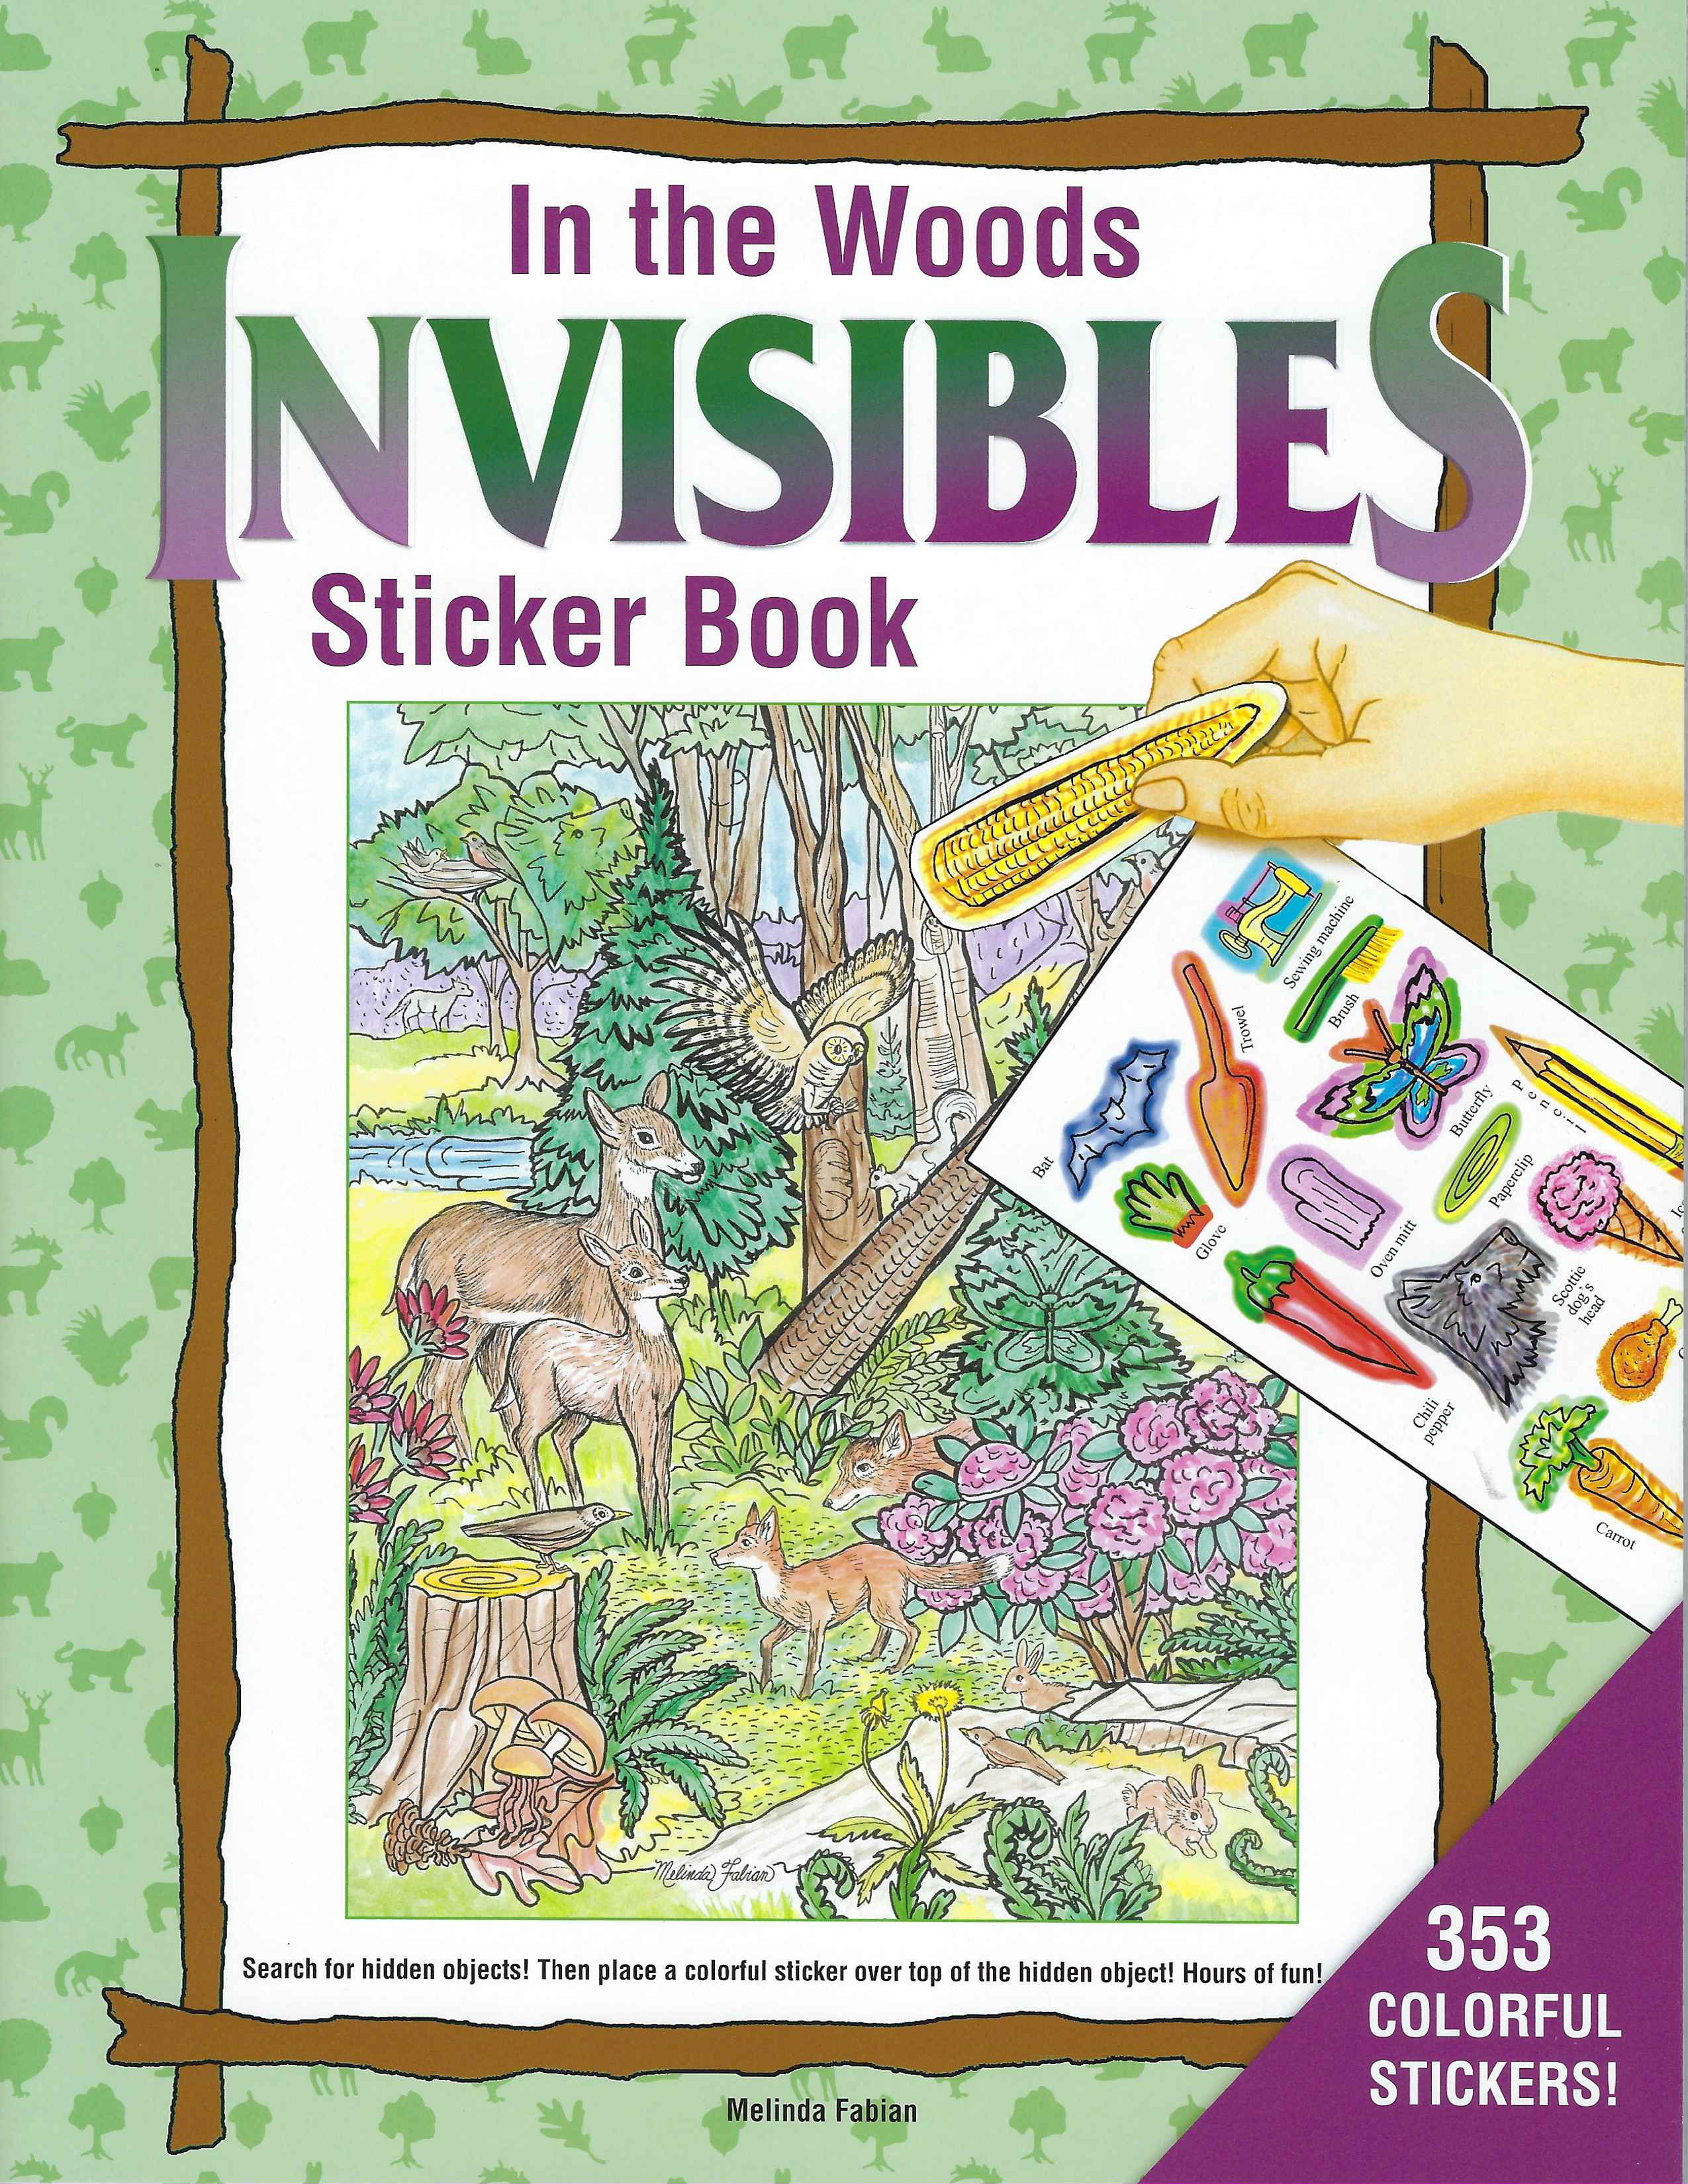 In the Woods Invisibles Sticker Book Melinda Fabian